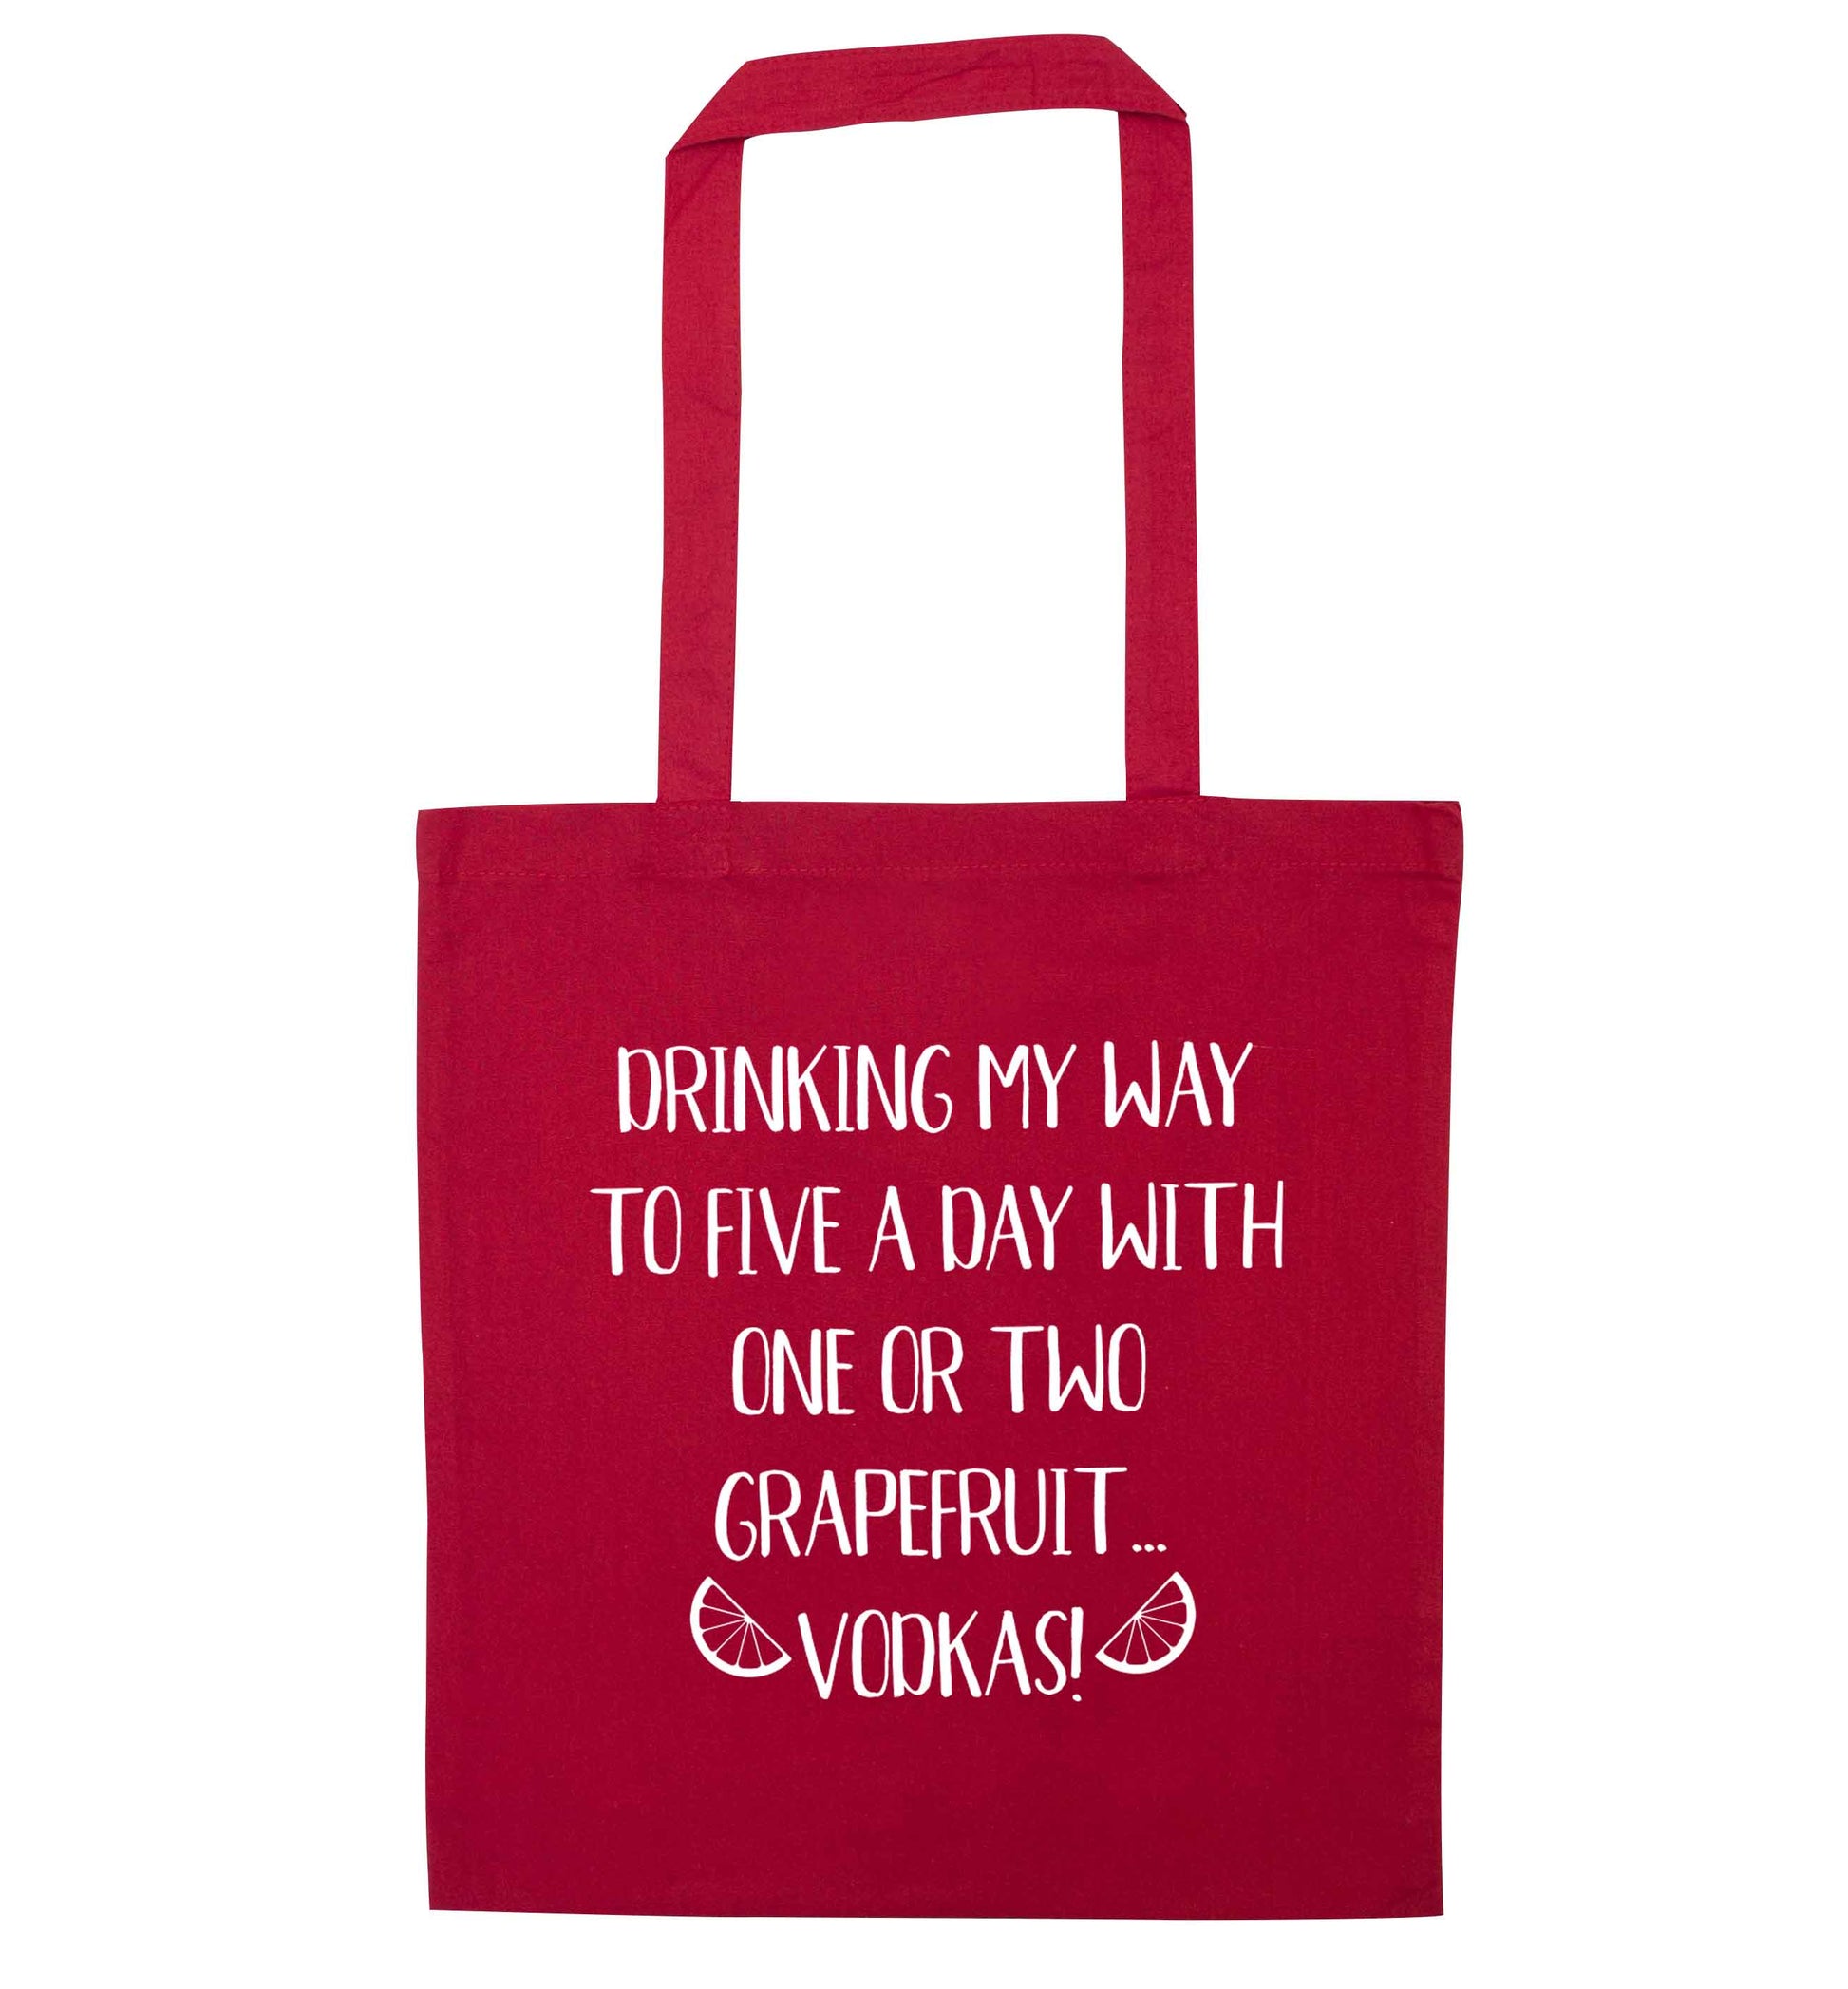 Drinking my way to five a day with one or two grapefruit vodkas red tote bag